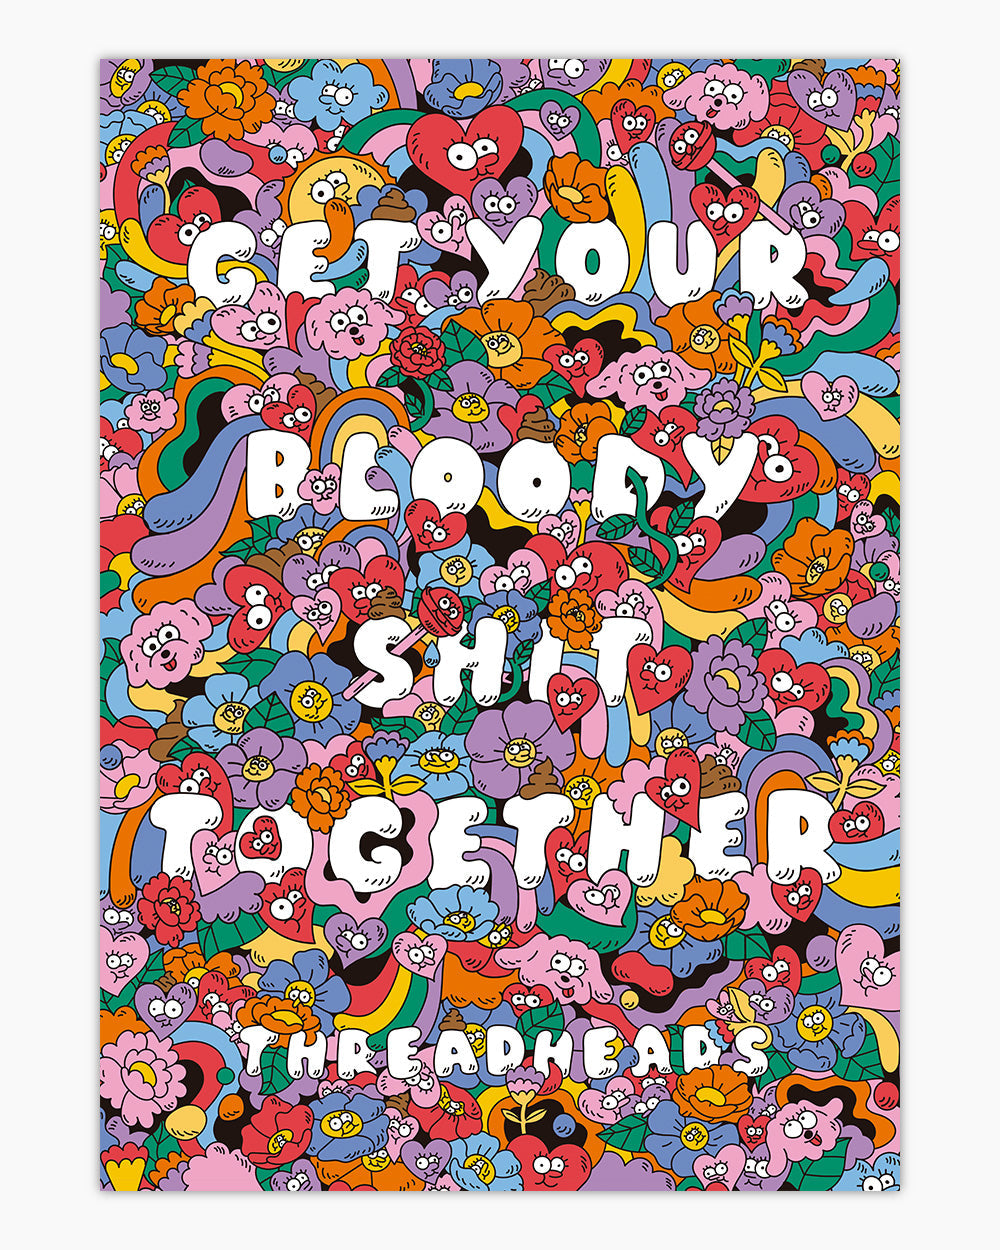 Get Your Bloody Shit Together Art Print | Wall Art